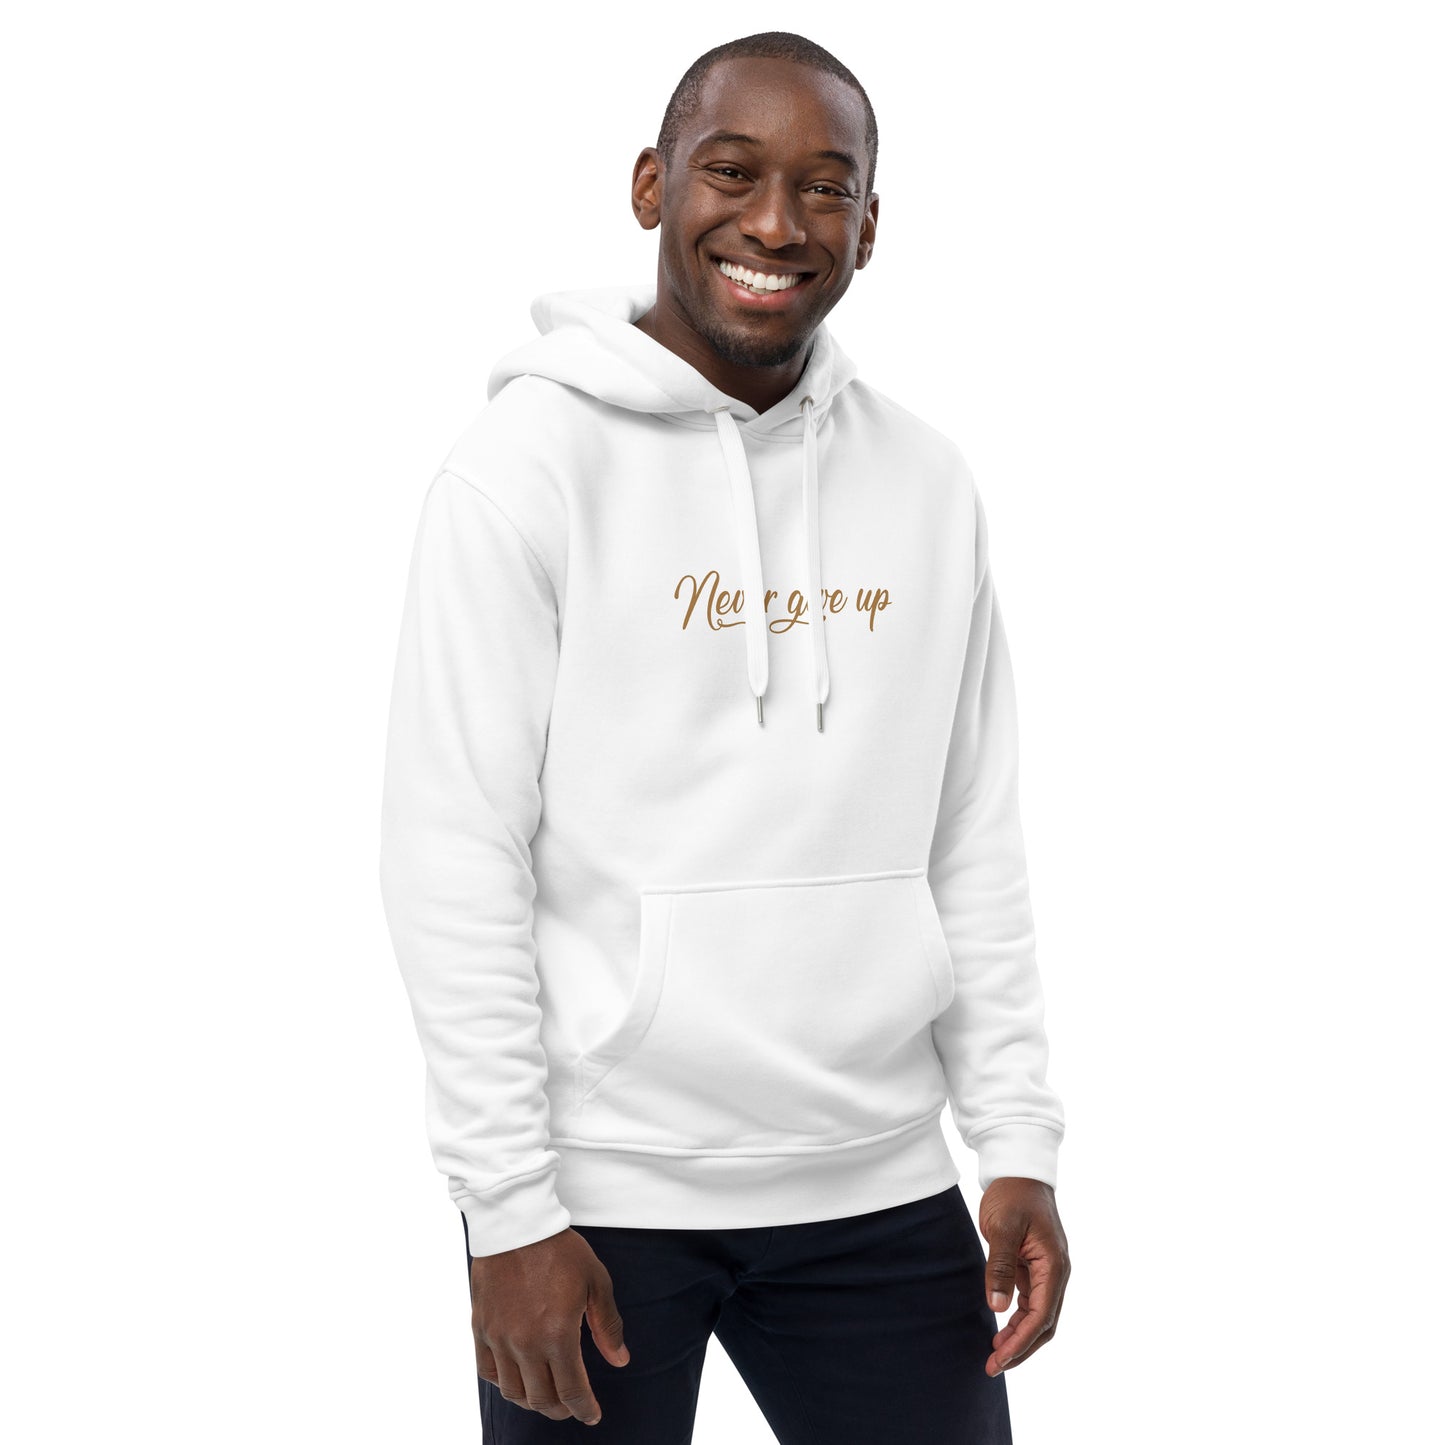 Never Give Up Men's Premium Organic Cotton Hoodie